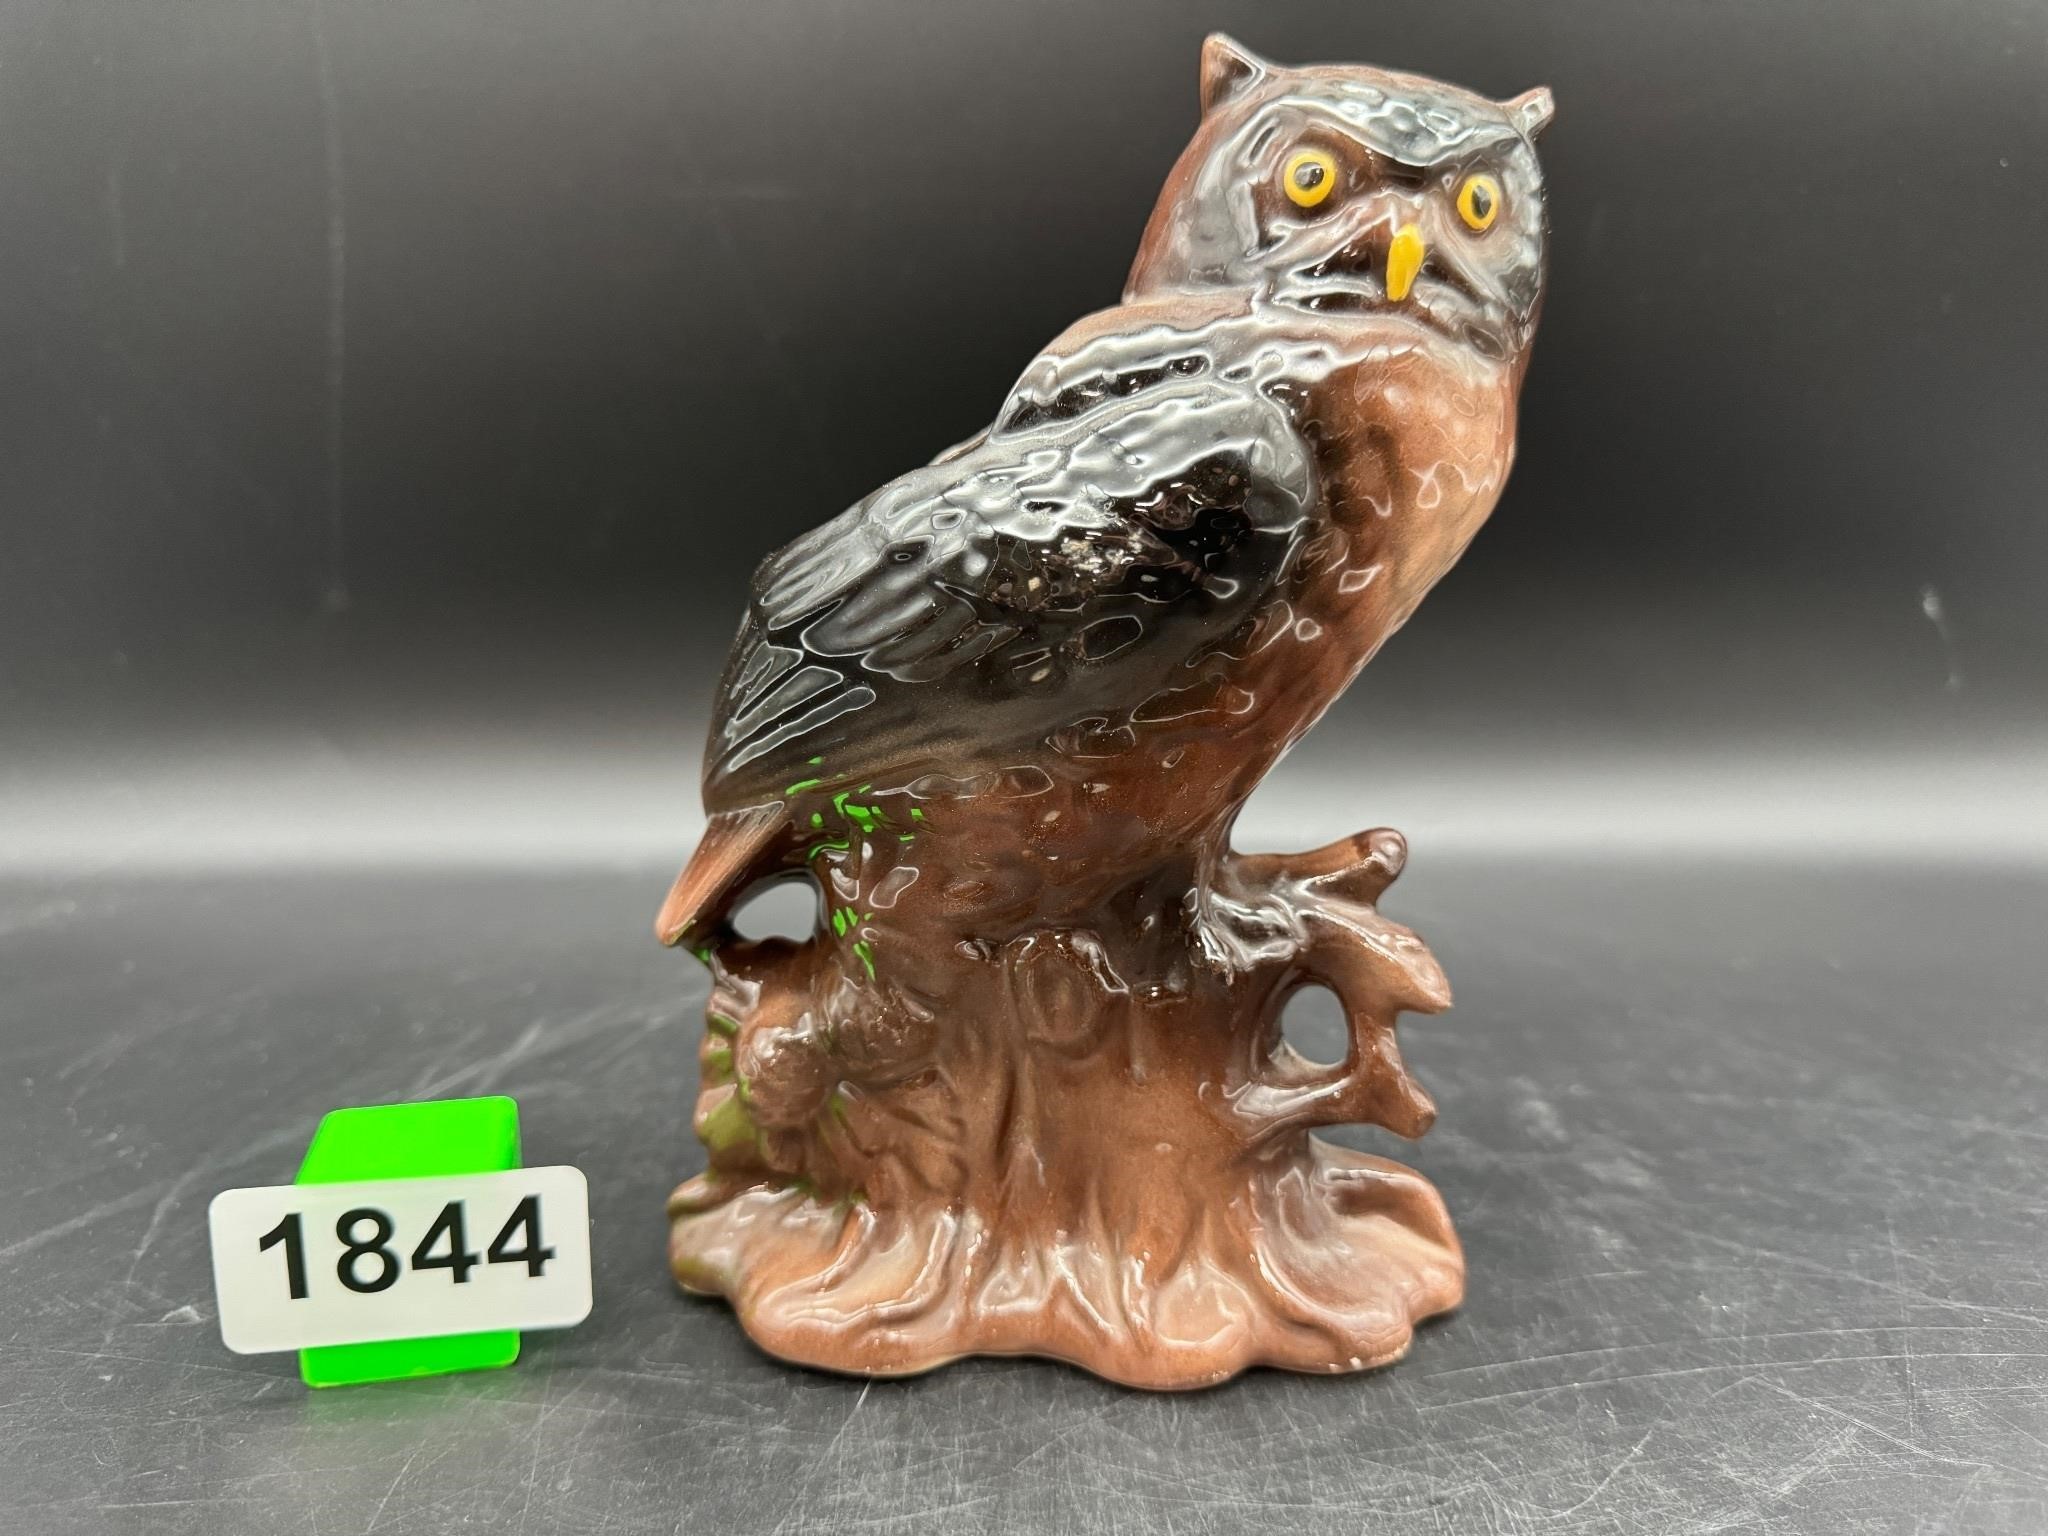 7" Vintage Owl Planter with Some Damage